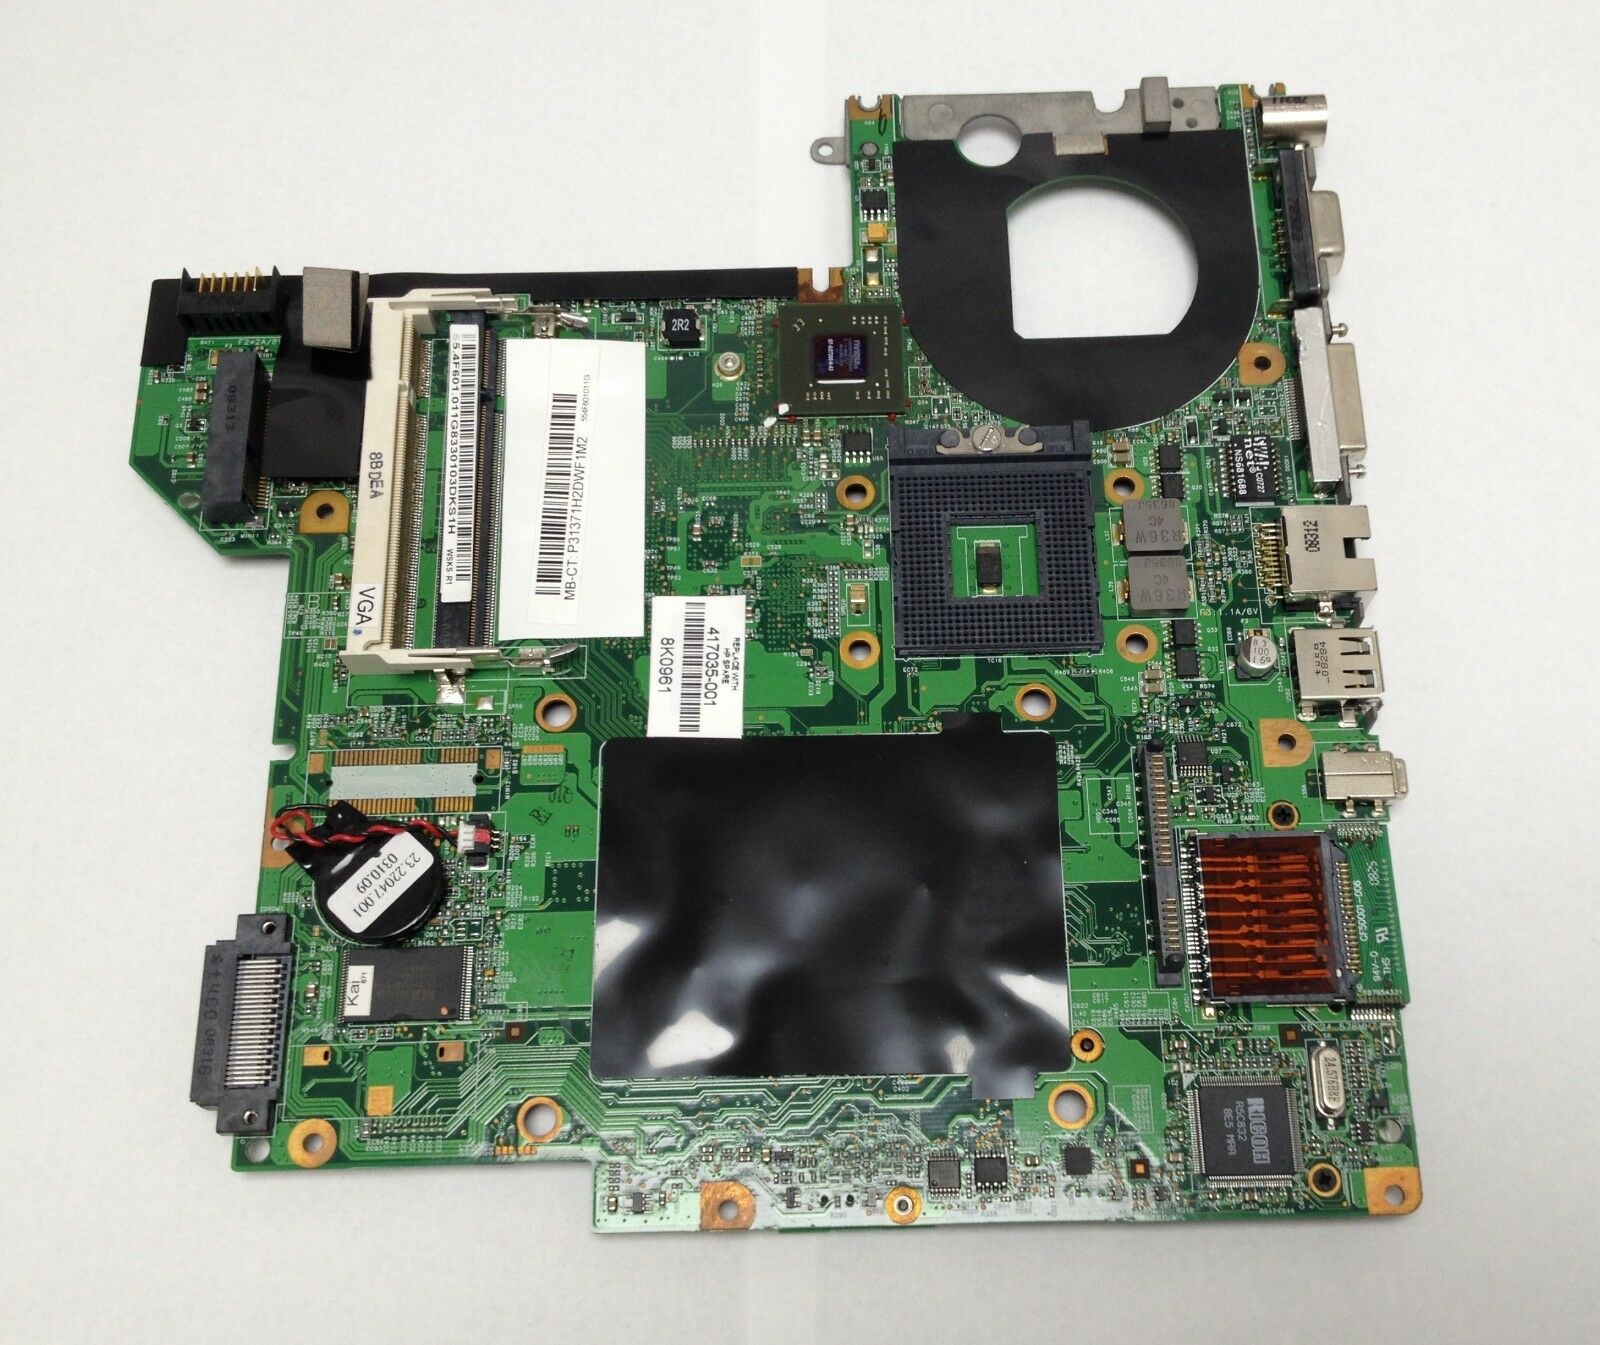 NEW x 1 HP PAVILION DV2000 INTEL LAPTOP MOTHERBOARD 417035-001 DESCRIPTION YOU ARE BUYING A NEW x 1 HP PAV